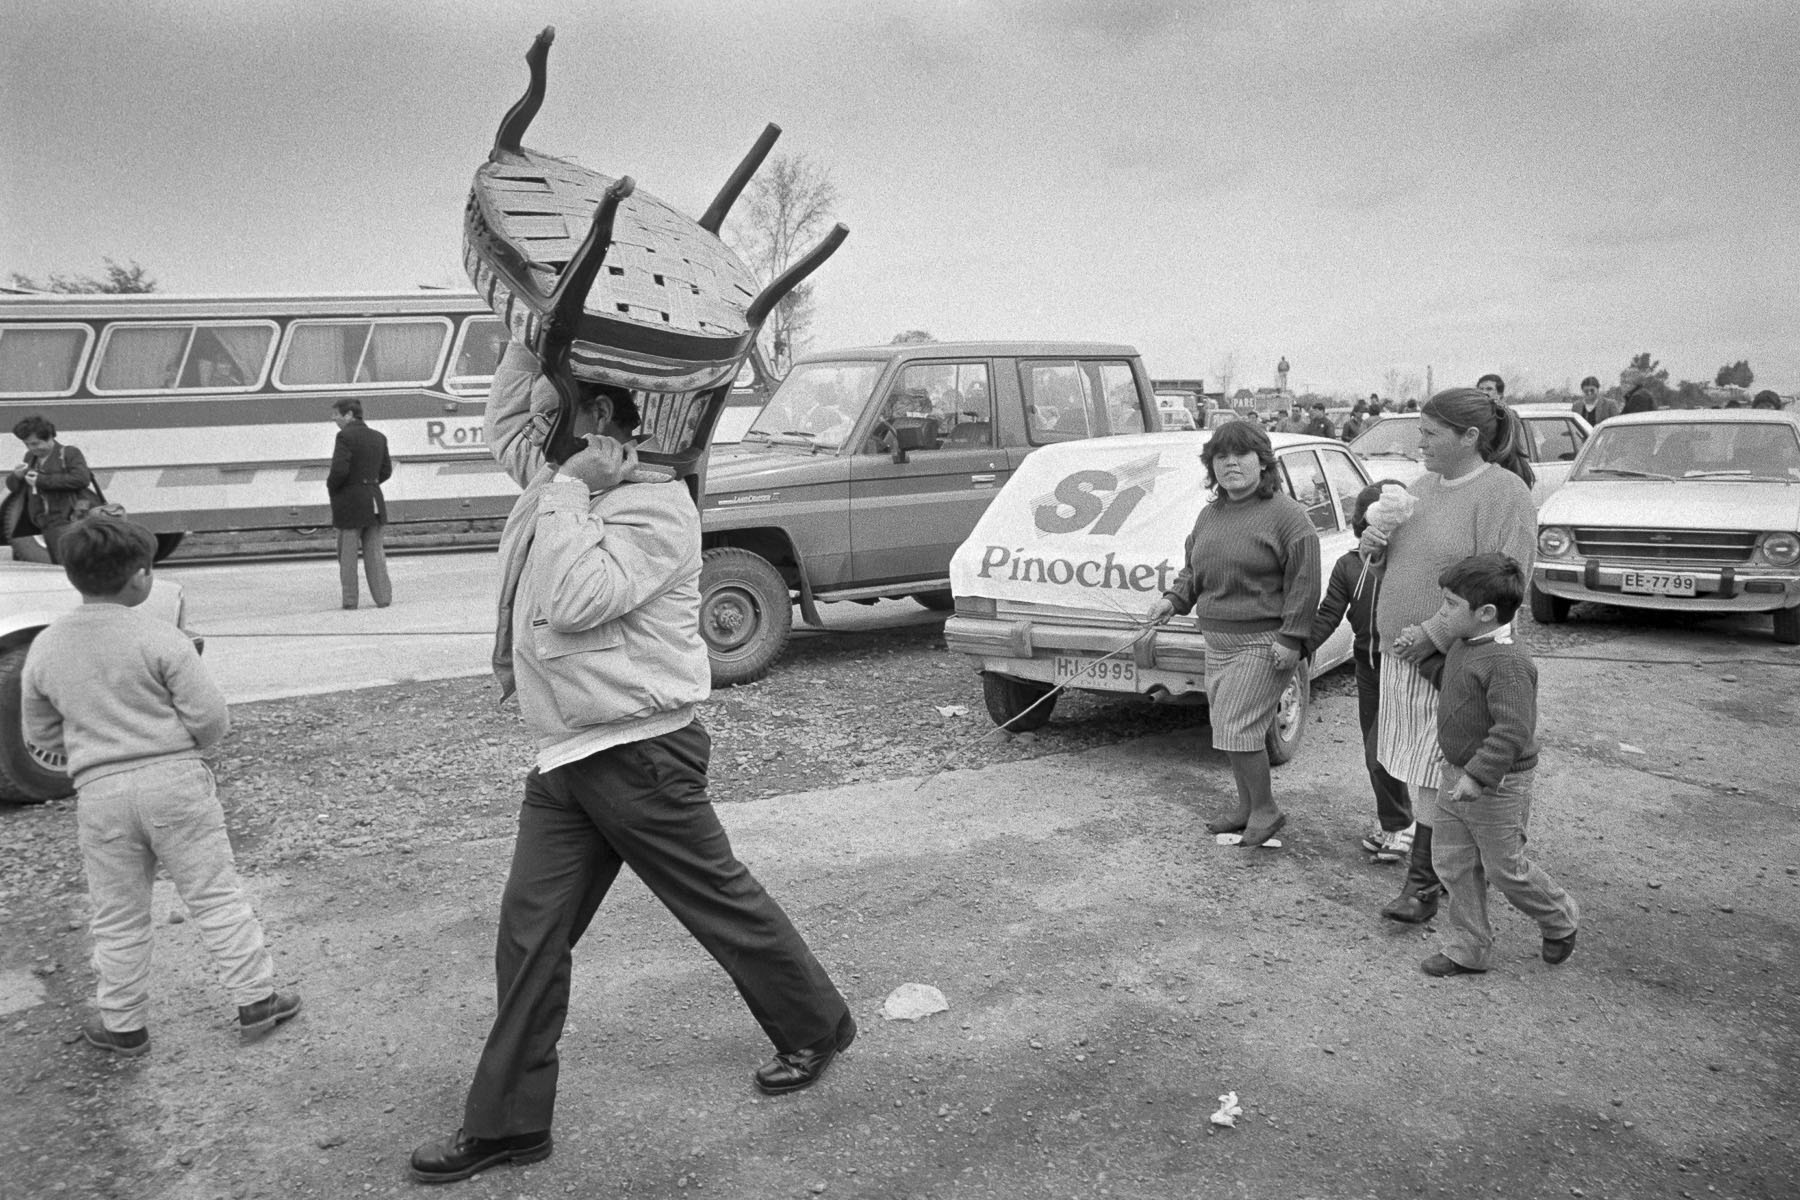 Augusto Pinochet supporters at SI rally during plebiscite Yes/No vote campaign in September 1988